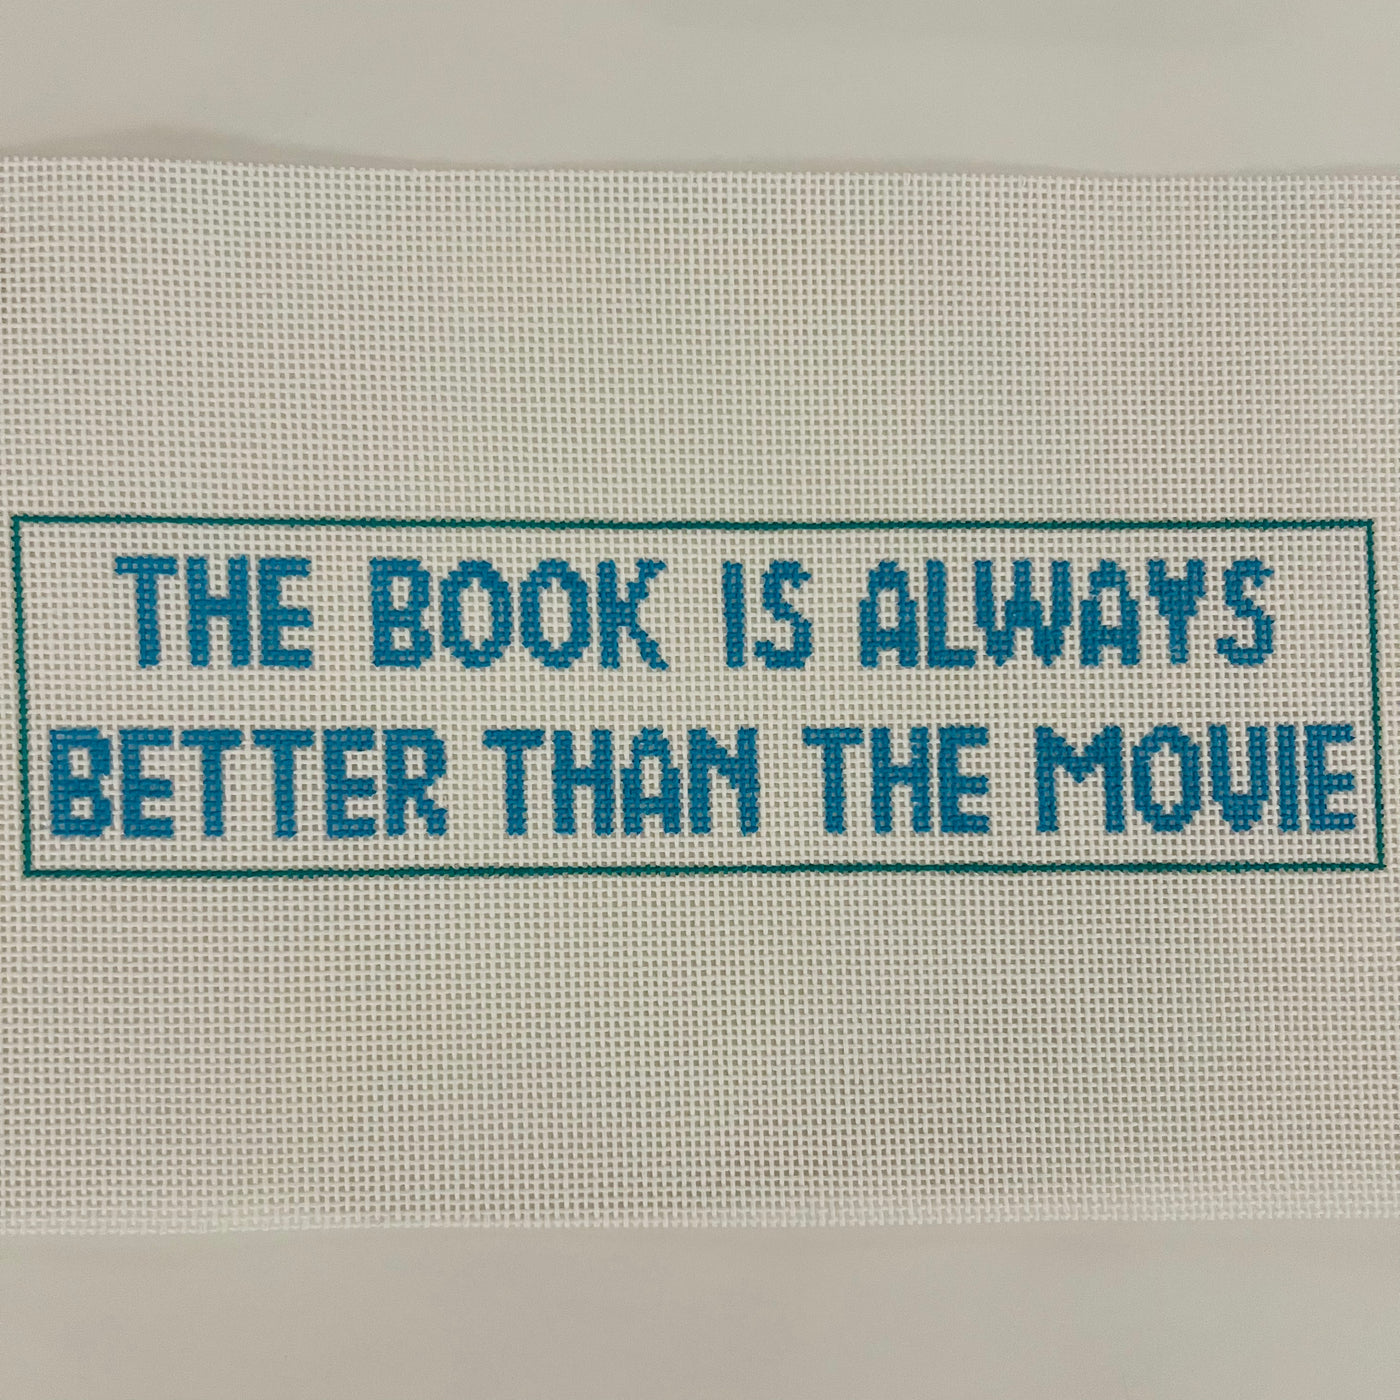 Book Better Than Movie Sign/Bookmark Needlepoint Canvas